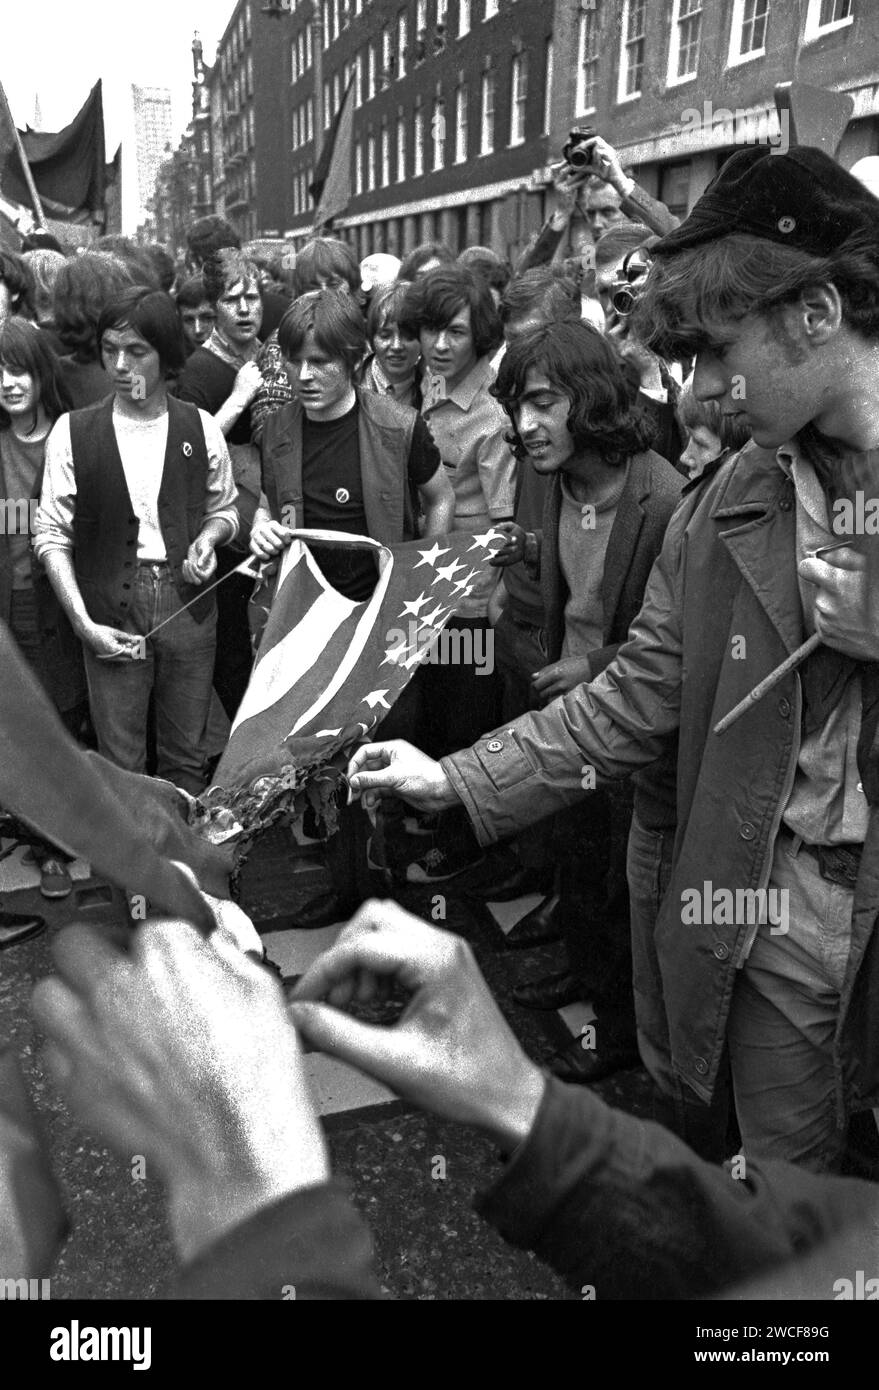 Demonstrators on Grosvenor Street in London attempting to burn an American flag near the US Embassy in Grosvenor Square at the anti-Vietnam protest march on 17th March, 1968 . Due to the violent clash between demonstrators and police this massive protest became known as 'The battle of Grosvenor Square' and was the inspiration for the Rolling Stones song, 'Street Fighting Man'. Stock Photo